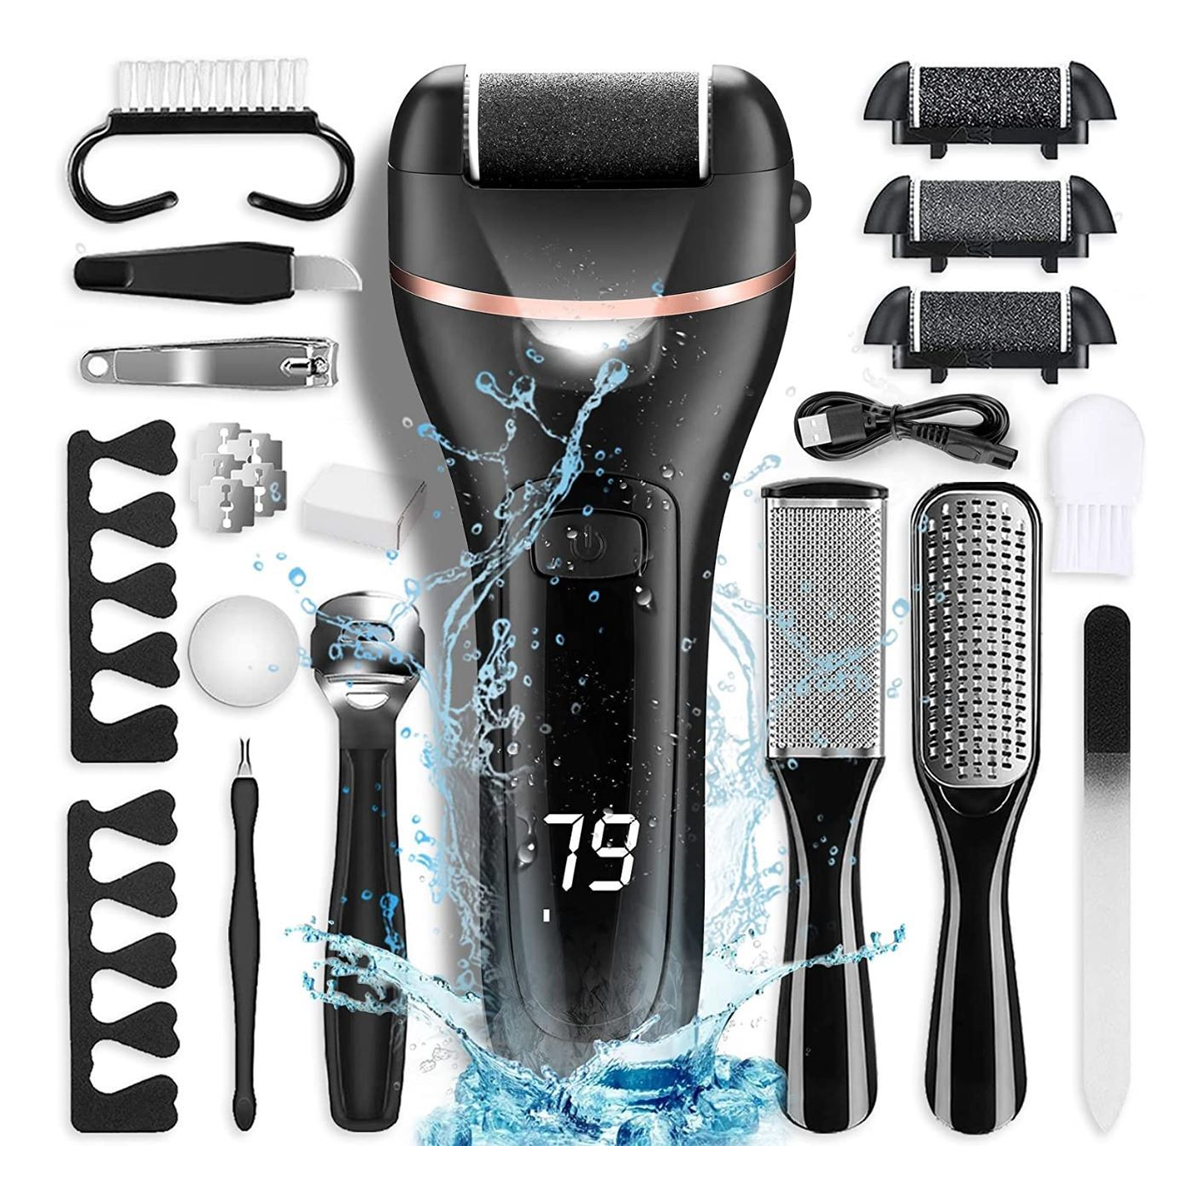 Electric Feet Callus Remover, Professional 18 in 1 Foot File Pedicure Kit Tools